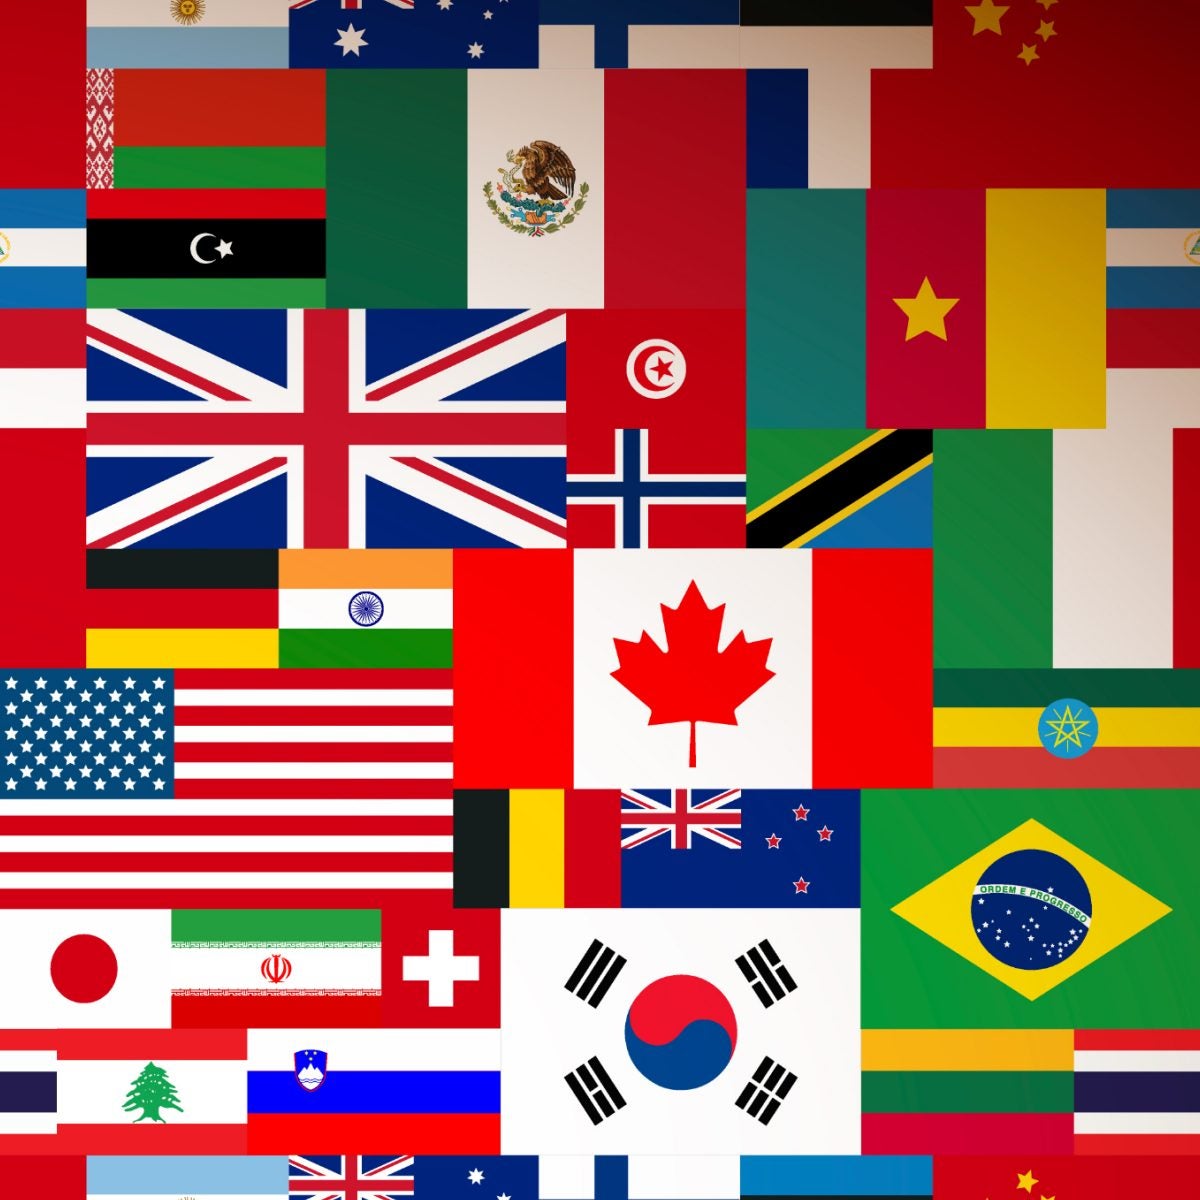 a number of international countries' flags overlapping and joined together